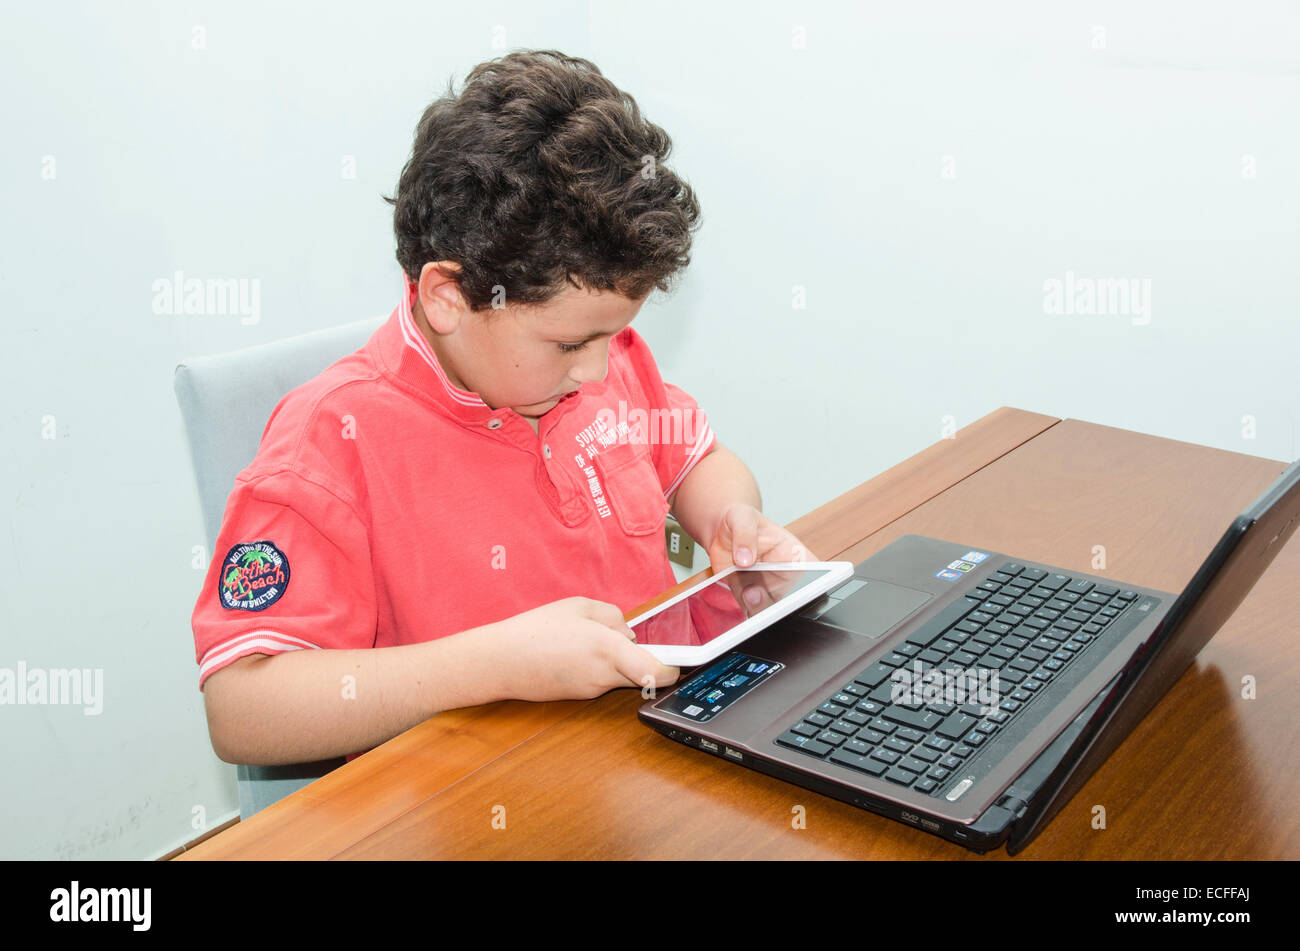 Study, play, learn, inquire with the new technologies. Stock Photo